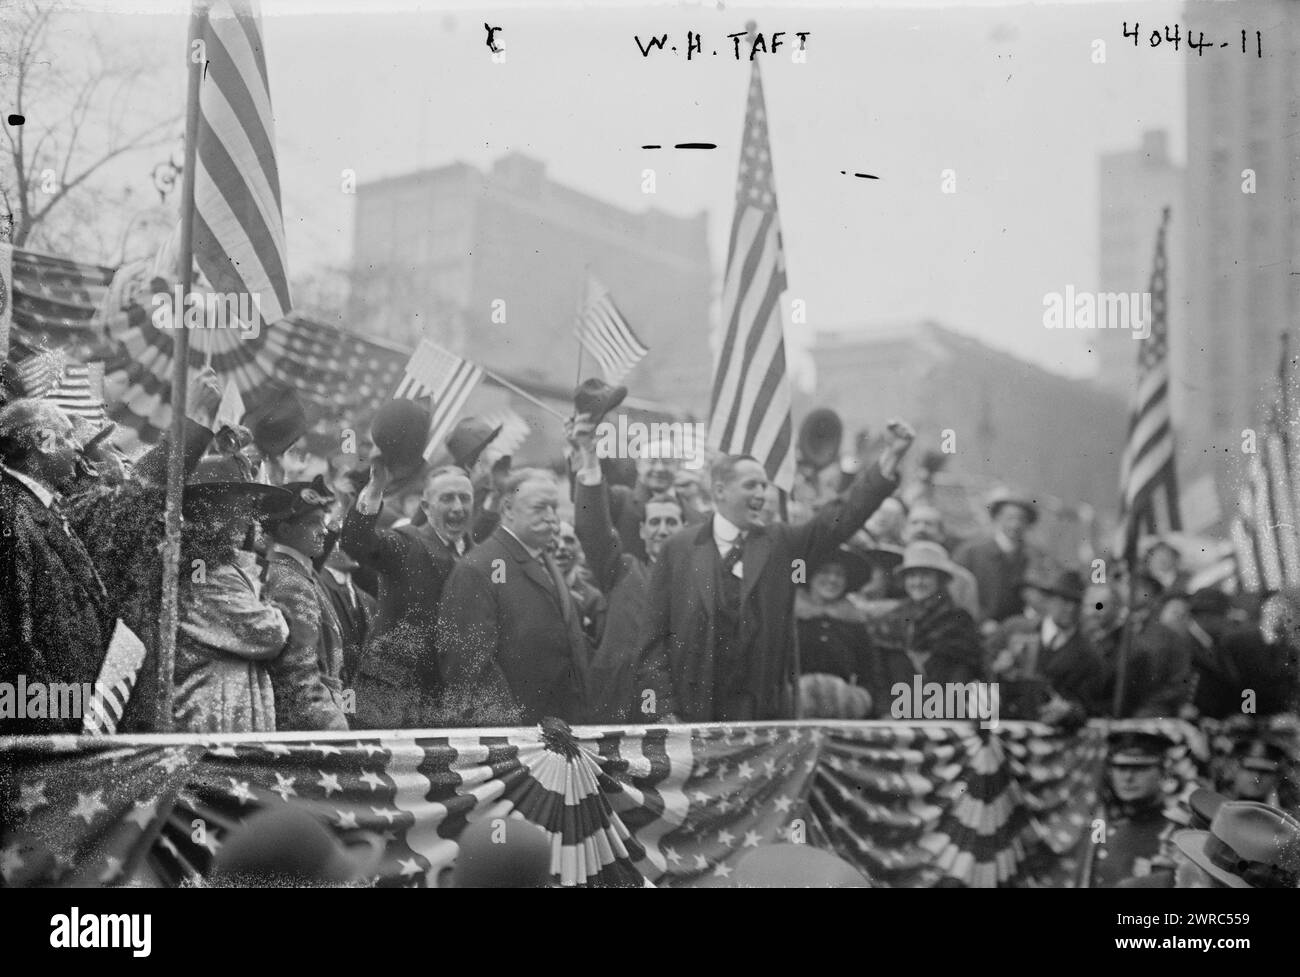 W.H. Taft, Photograph shows former president William Howard Taft campaigning for Republican candidate Charles Evans Hughes on Nov. 4, 1916 in Union Square, New York City., 1916 Nov. 4, Glass negatives, 1 negative: glass Stock Photo